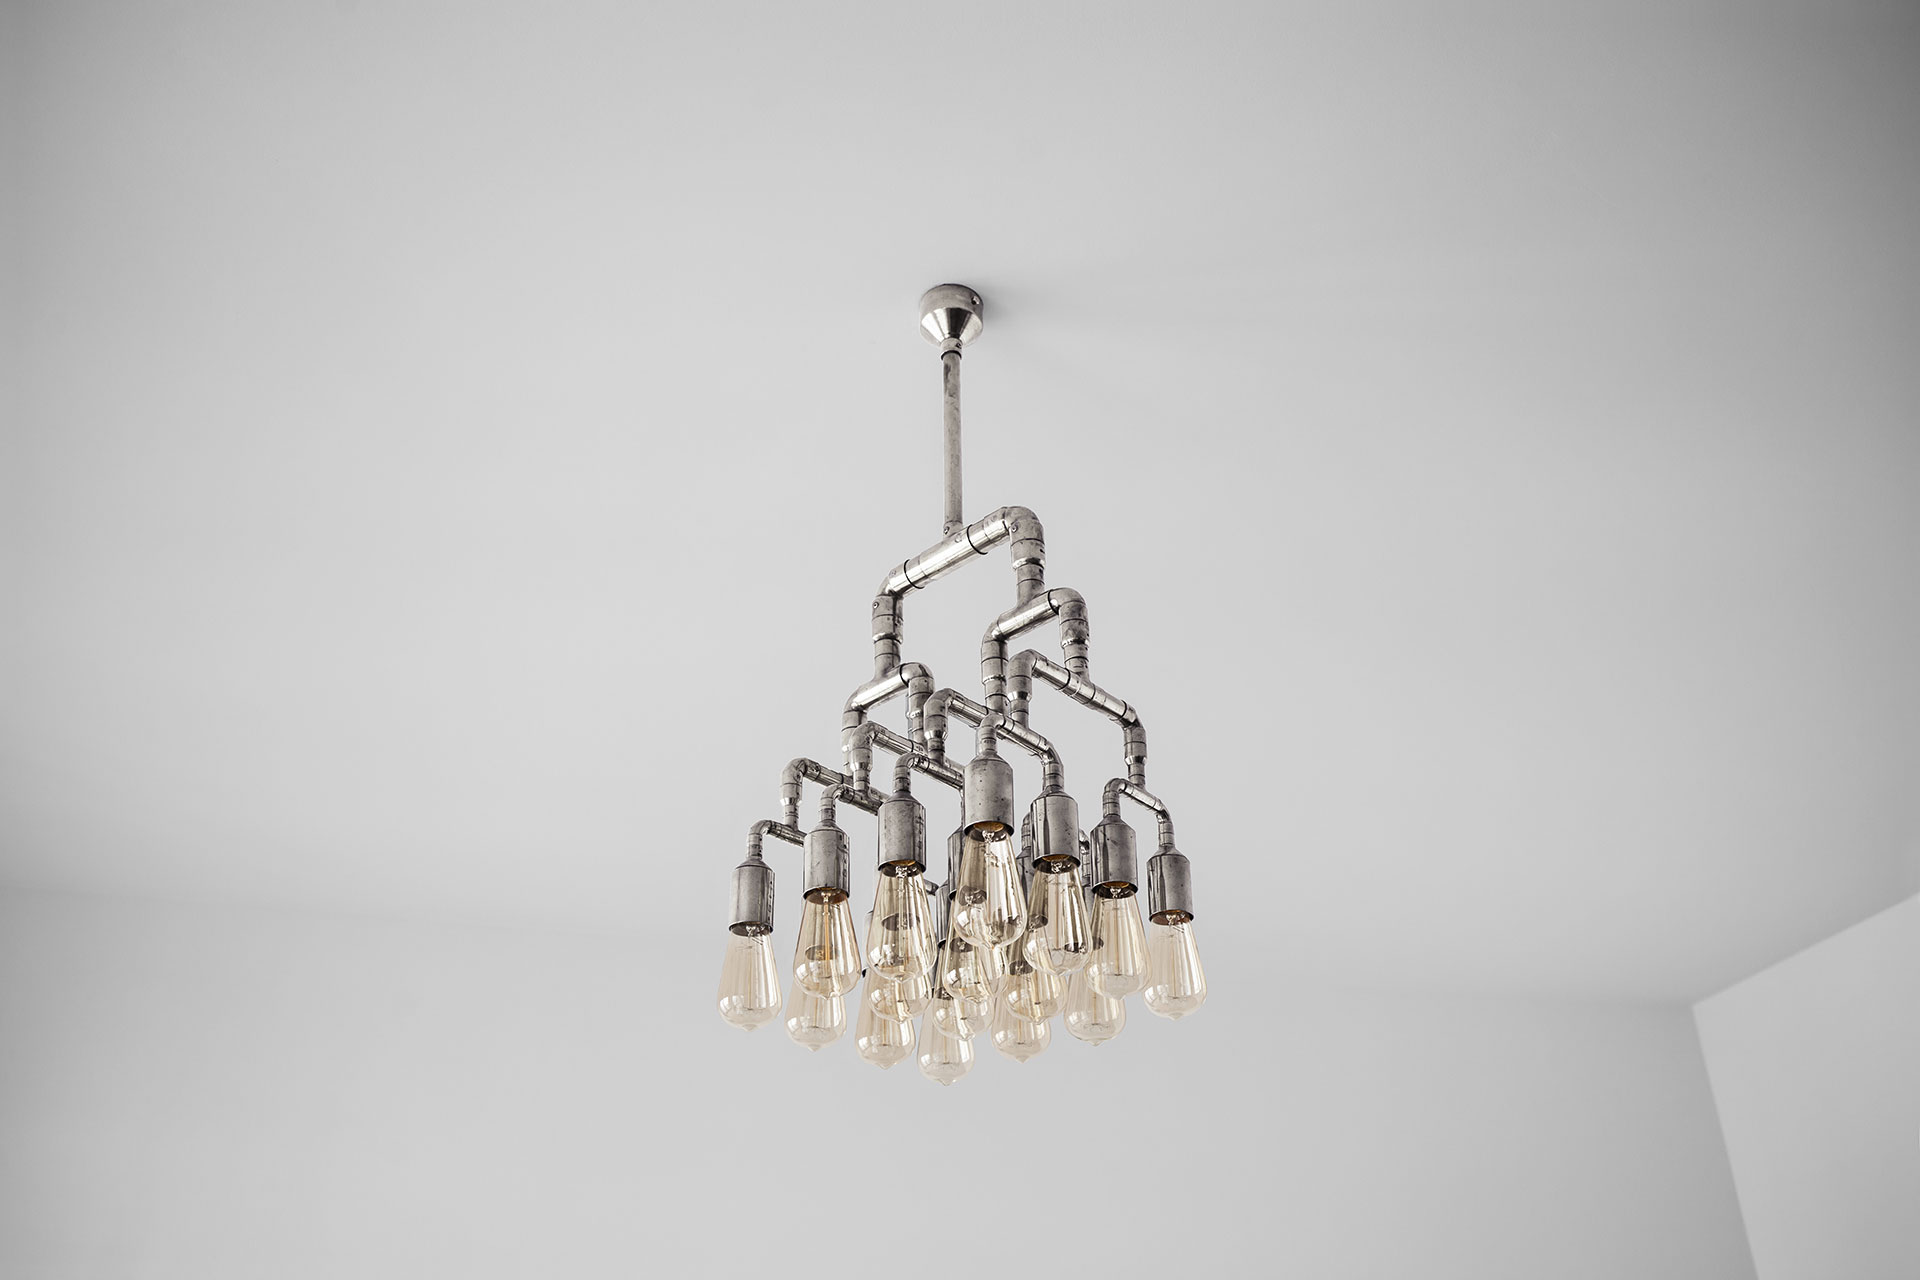 Designer lighting chandelier in silver nickel plated color inspired by industrial and steampunk style